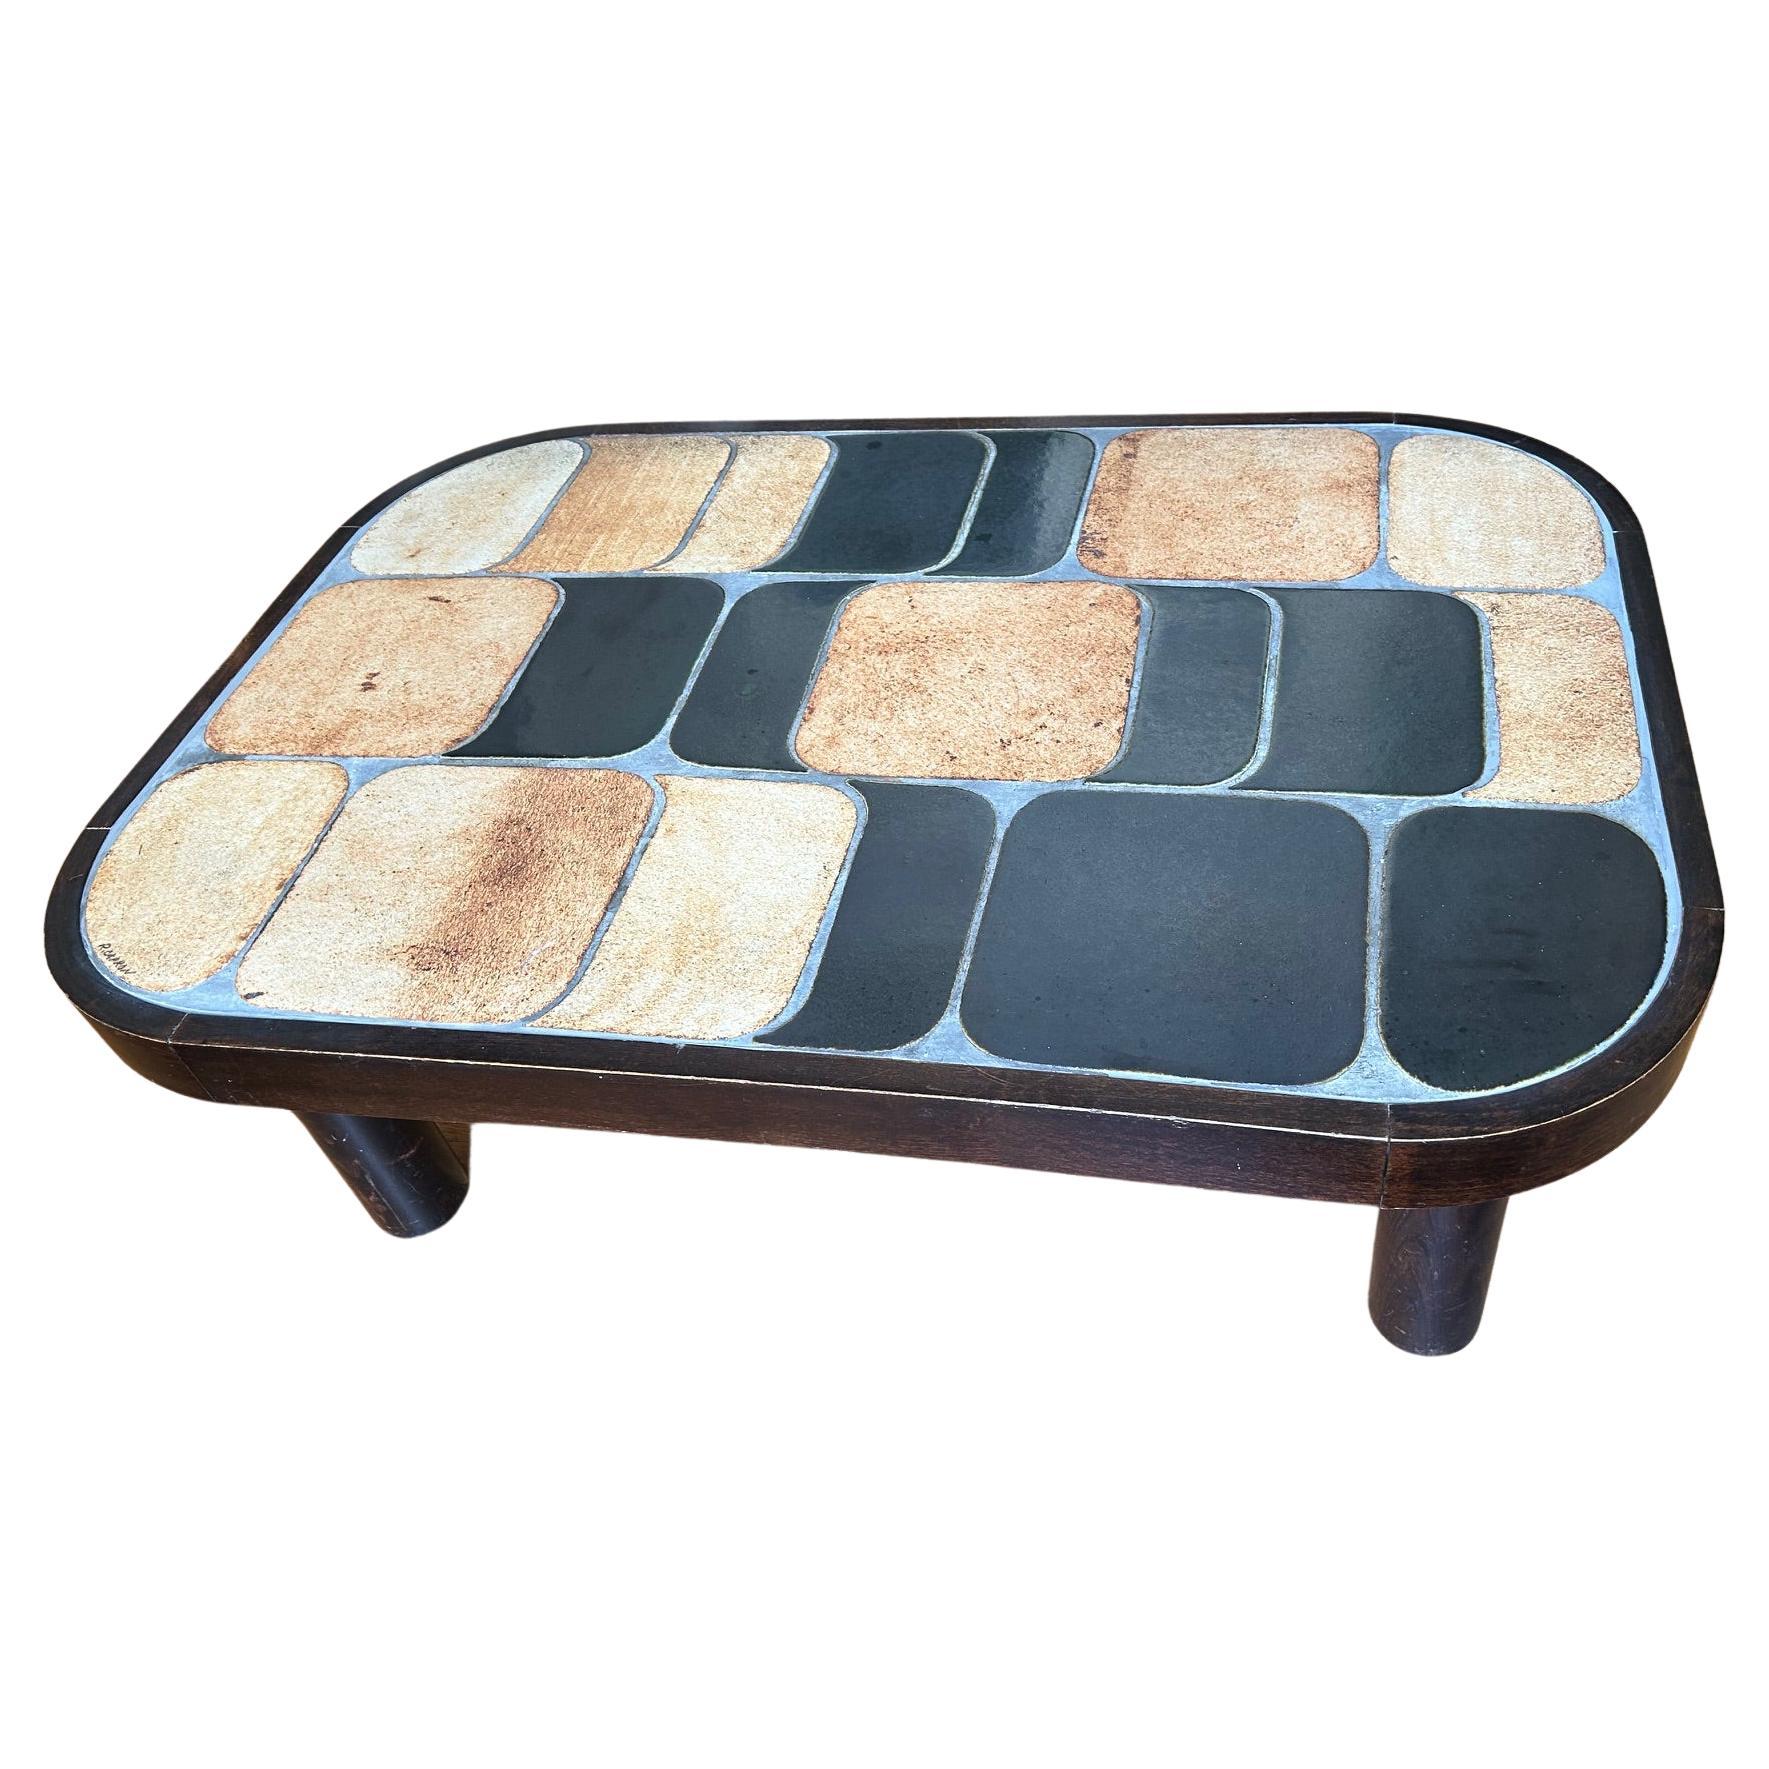 Ceramic Shogun coffee table by Roger Capron, France, 1960's For Sale